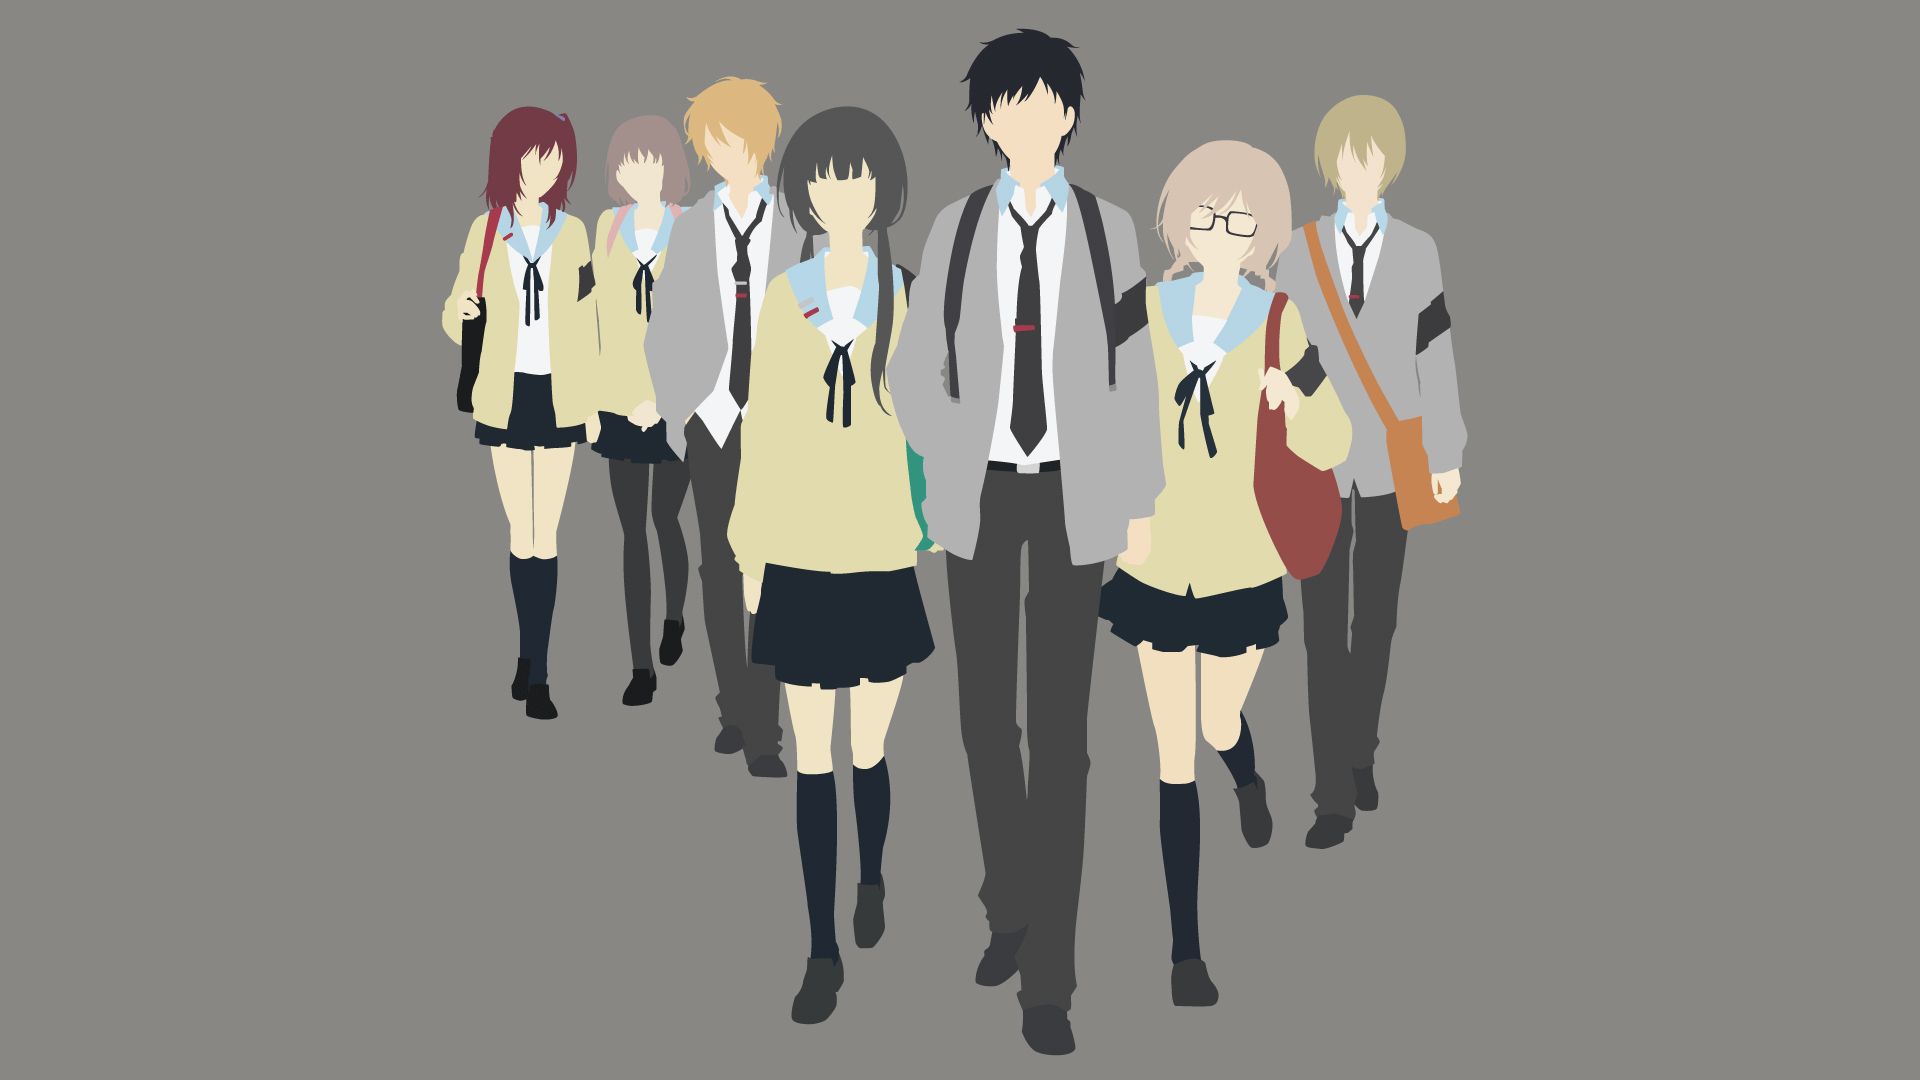 ReLIFE background